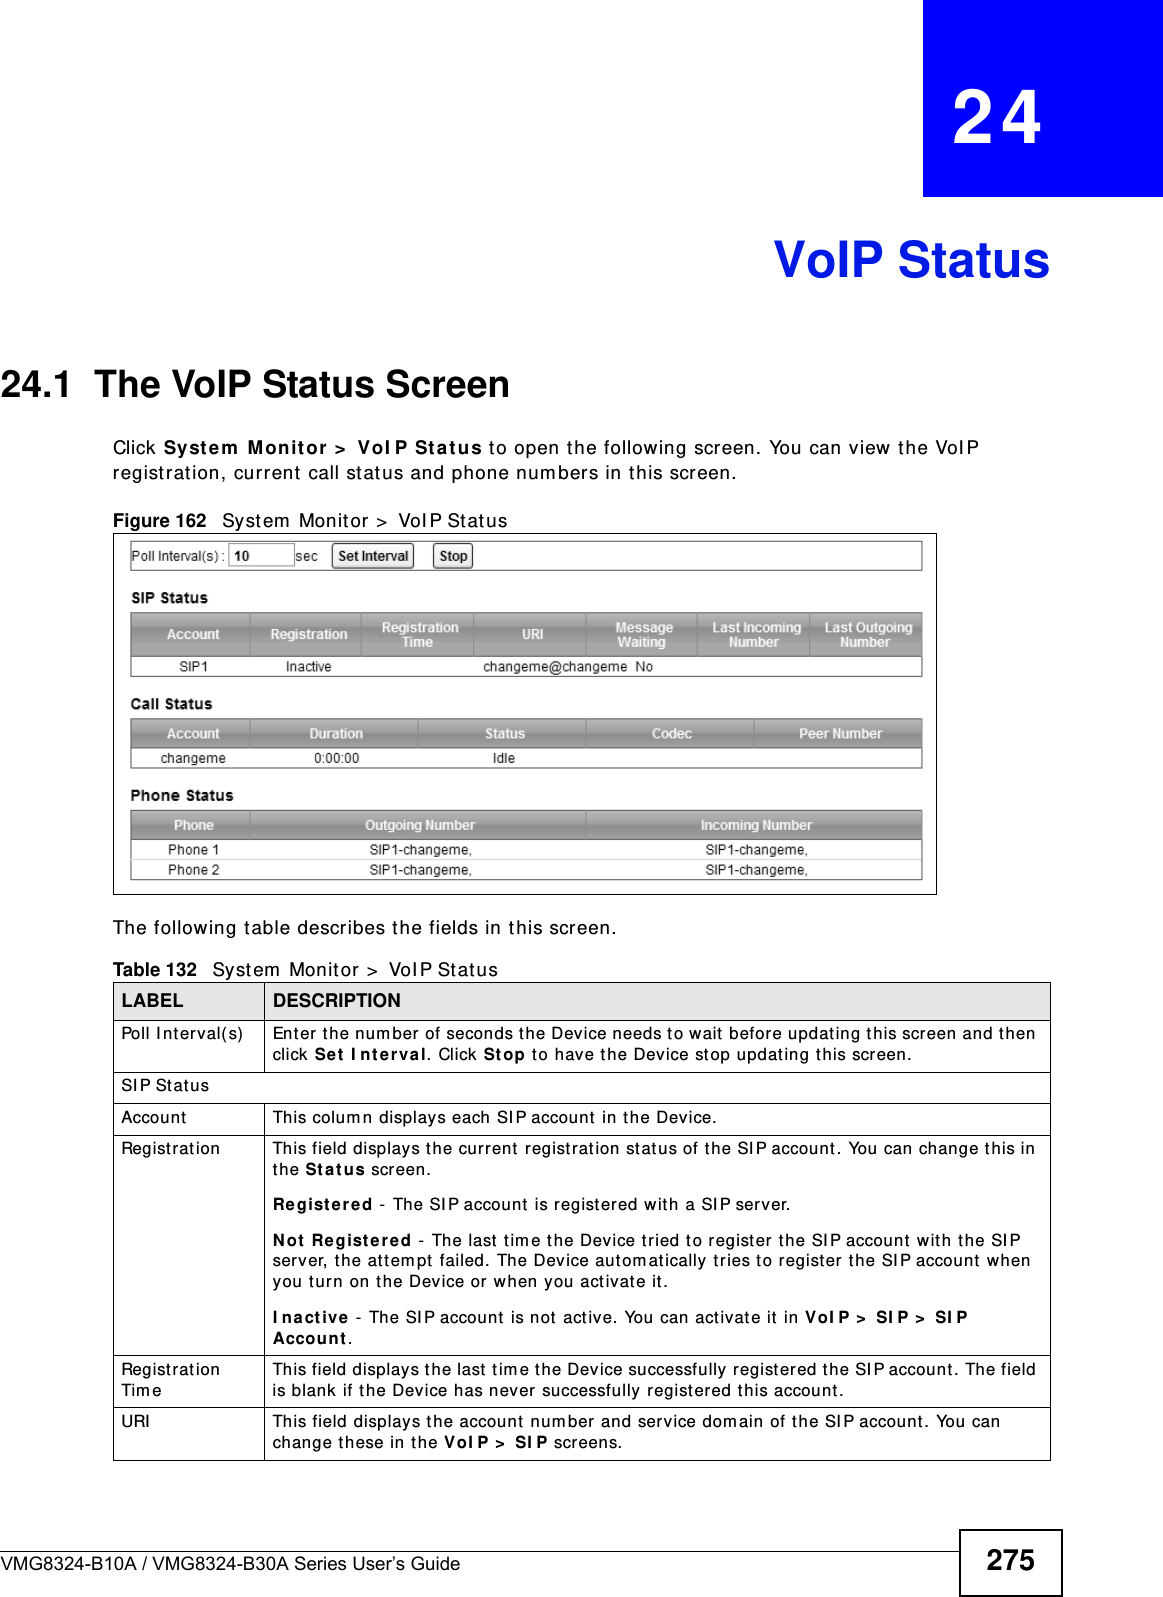 VMG8324-B10A / VMG8324-B30A Series User’s Guide 275CHAPTER   24 VoIP Status24.1  The VoIP Status ScreenClick Syst e m  Monit or &gt;  VoI P St at us t o open t he following screen. You can view the VoI P registrat ion, current call st atus and phone num bers in this screen.Figure 162   Syst em  Monit or &gt;  VoI P St atusThe following t able describes the fields in this screen. Table 132   Syst em  Monit or &gt;  VoI P Stat usLABEL DESCRIPTIONPoll I nt erval( s) Enter the num ber of seconds t he Device needs t o wait  before updat ing this screen and then click  Se t  I nterval. Click St op to have the Device stop updat ing this screen.SI P StatusAccount This column displays each SI P account  in the Device.Registrat ion This field displays the curr ent registrat ion stat us of t he SI P account . You can change t his in the St a t u s scr een.Registered -  The SI P account  is registered wit h a SI P ser ver.N ot Re gist e r e d -  The last t im e t he Device tried to regist er t he SI P account  wit h t he SI P server, the attem pt  failed. The Device aut om at ically t ries t o regist er t he SI P account when you t urn on the Device or w hen you act ivat e it.I n act iv e  - The SI P account is not  act ive. You can activate it  in V oI P &gt;  SI P &gt;  SI P Account.Regist rat ion  Tim eThis field displays the last  tim e the Device successfully r egistered the SI P account. The field is blank  if t he Device has never successfully regist ered this account .URI This field displays the account  num ber and service dom ain of the SI P account. You can change these in t he VoI P &gt;  SI P screens.